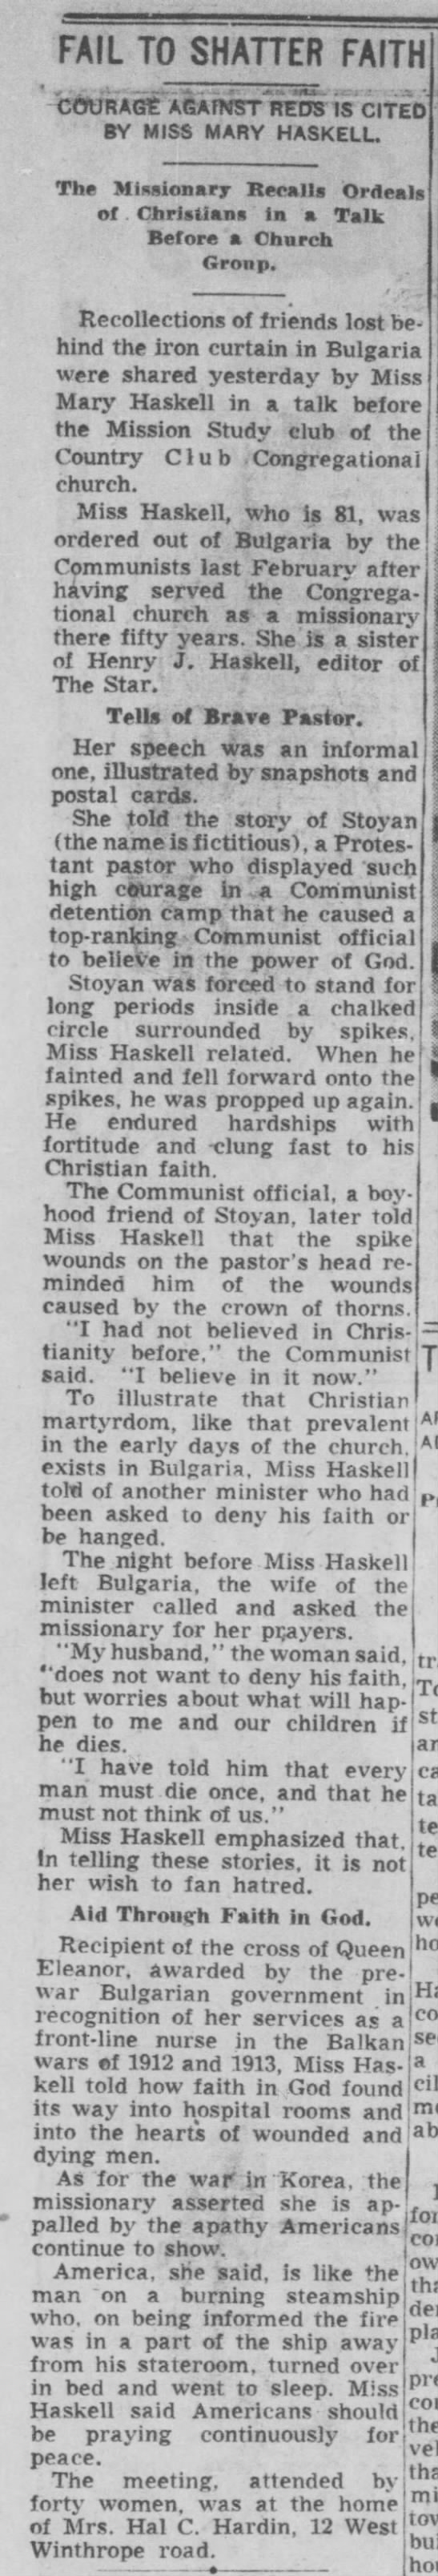 MM Haskell on Bulgarian mission work, 1950. - 